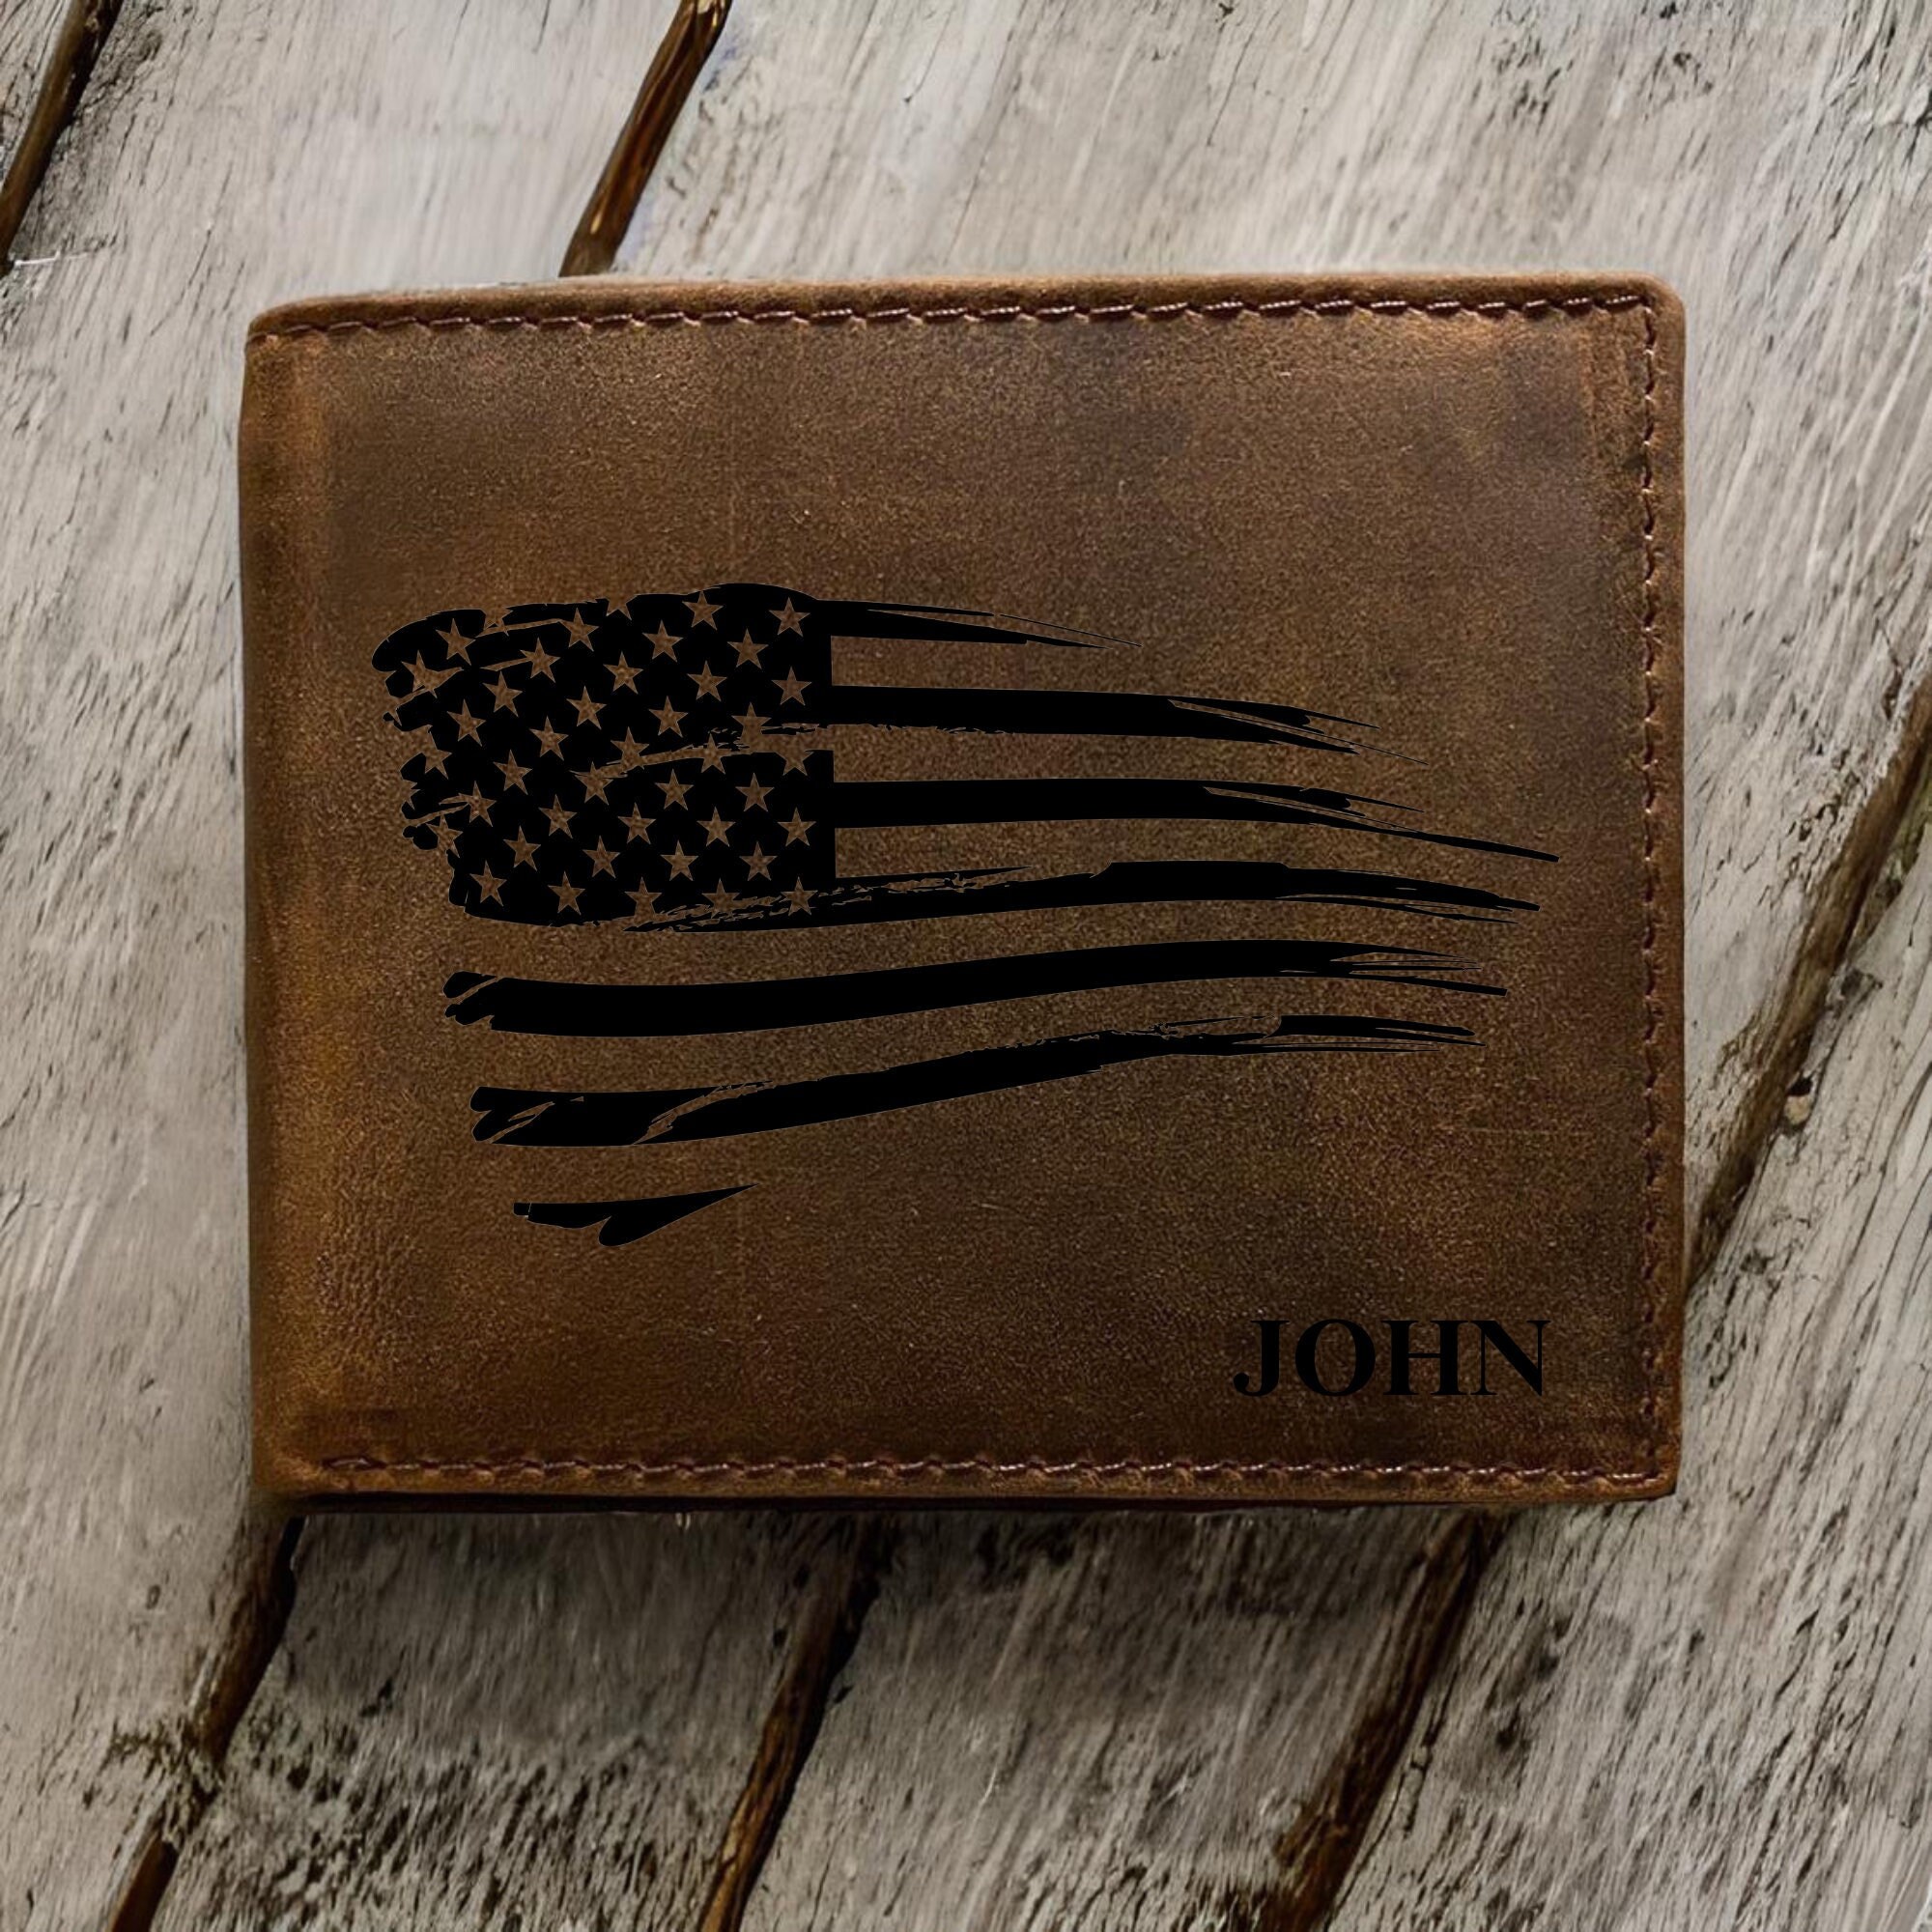  RAW HYD Leather American Flag Wallet for Men – Full-Grain  Leather Flag Wallet - 6.75 Long Wallets for Men – Patriotic American Flag Wallet  Mens Leather – Durable Western Wallets for